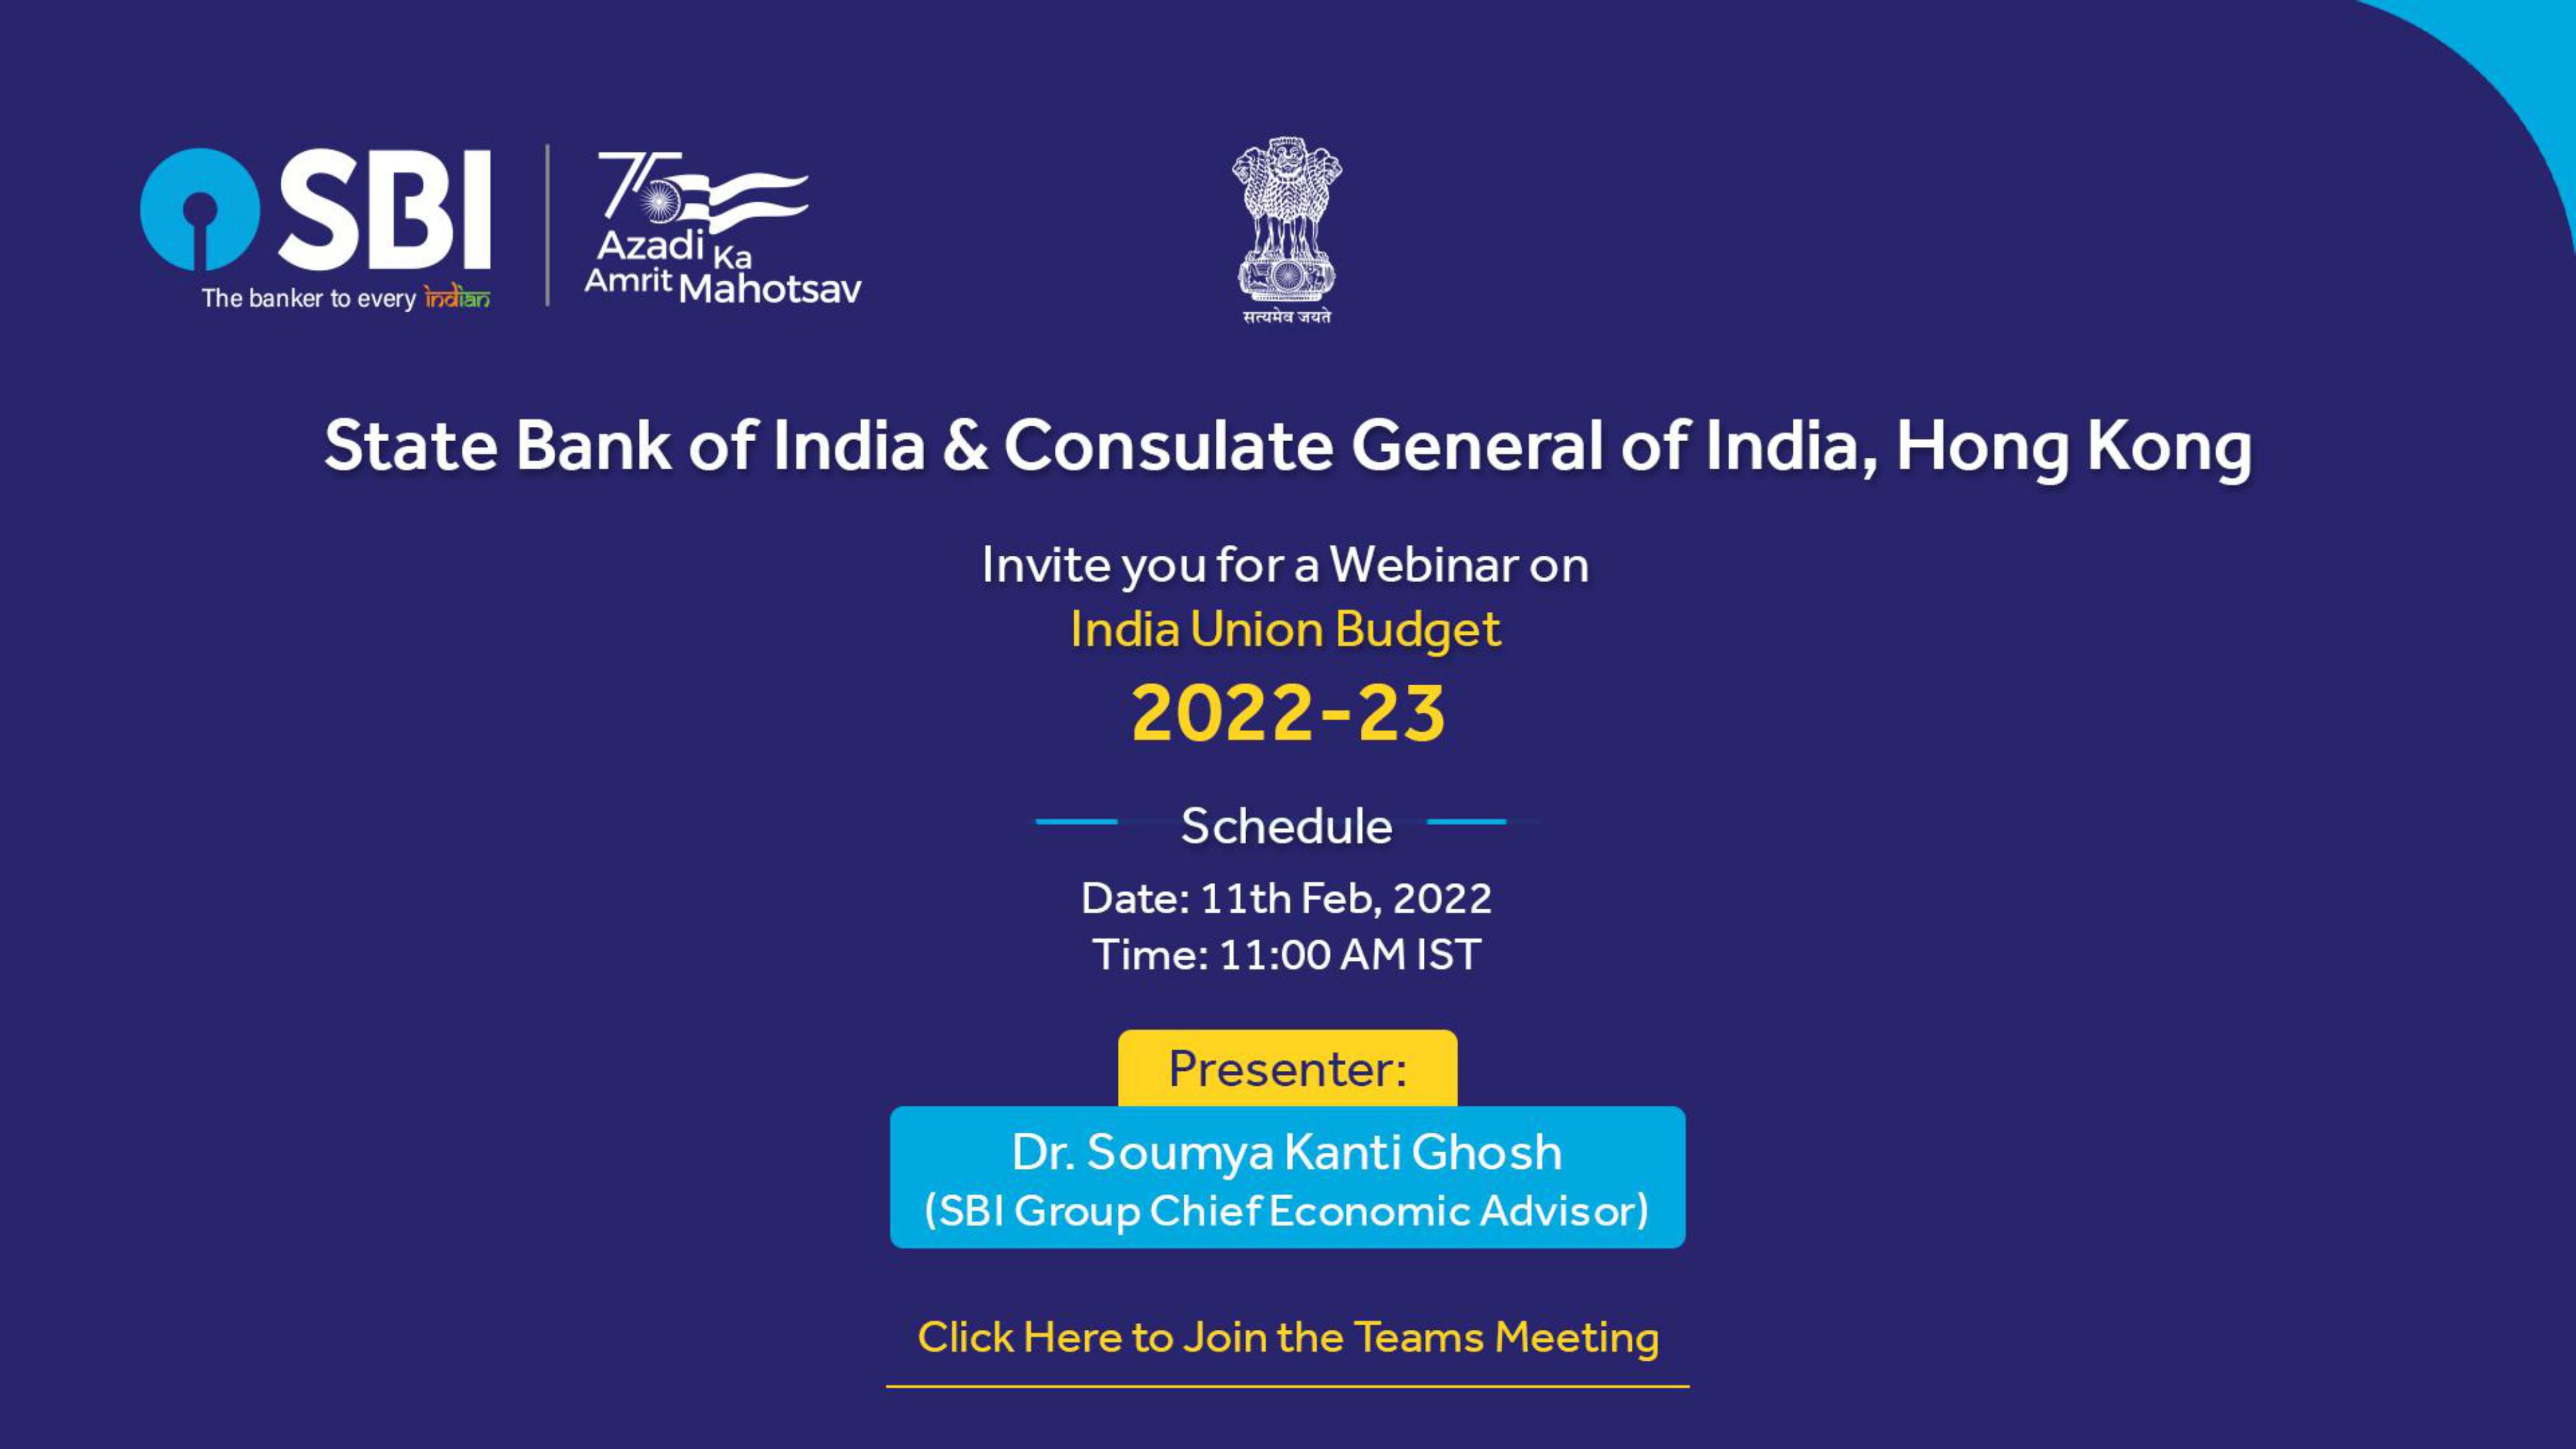 The Consulate General of India, Hong Kong invites you to attend a webinar on India's Union Budget 2022-23 on 11th February 2022 from 1:30 PM HKT